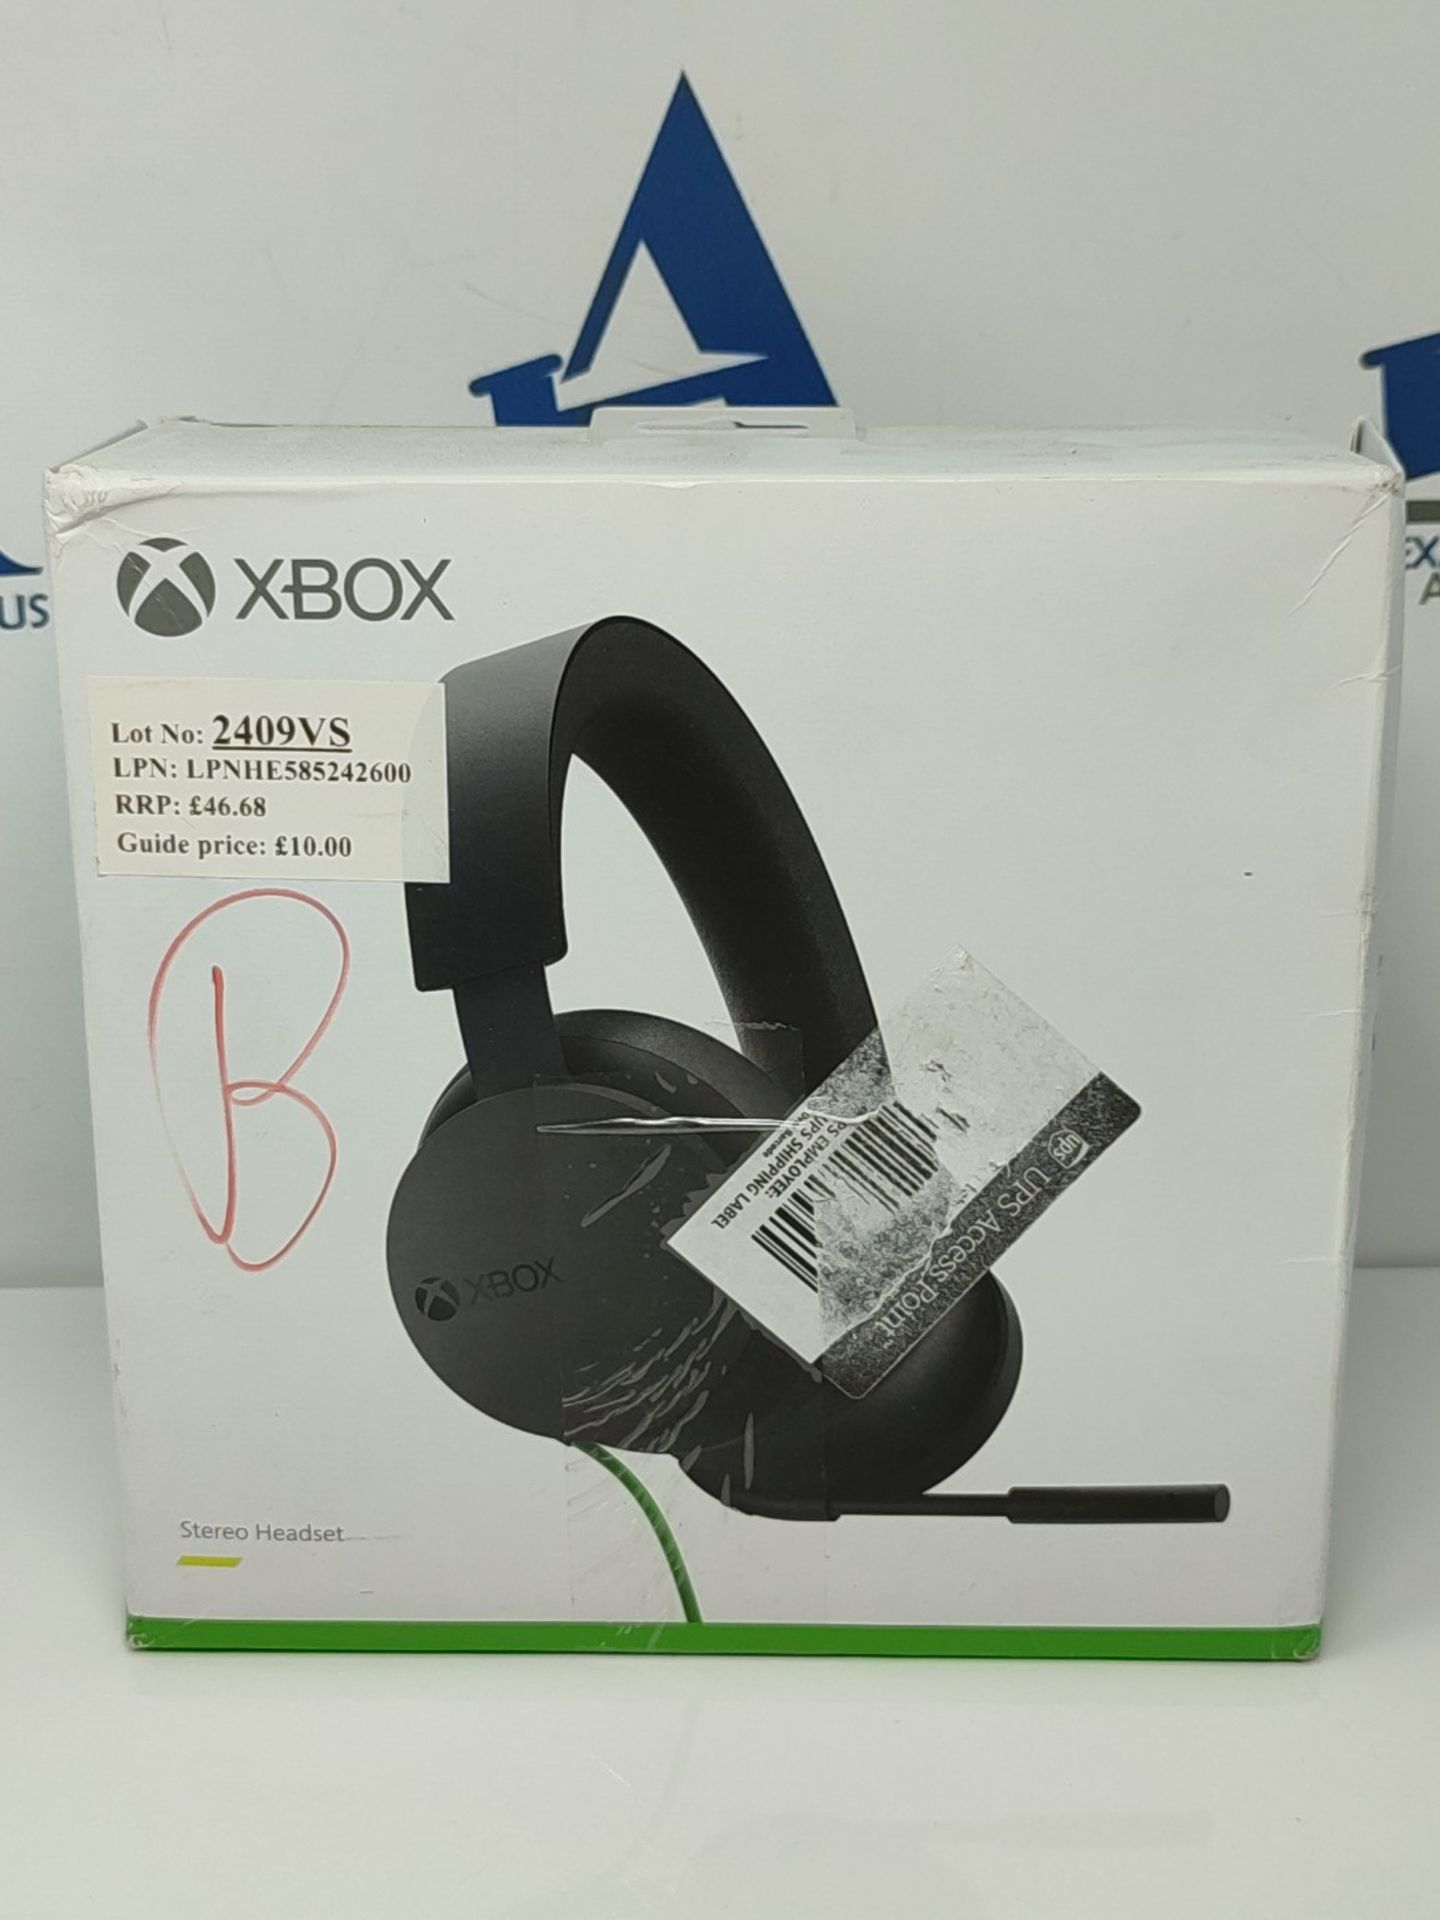 [CRACKED] Xbox Stereo Headset - [Xbox Series X|S, Xbox One, PC] - Image 2 of 3